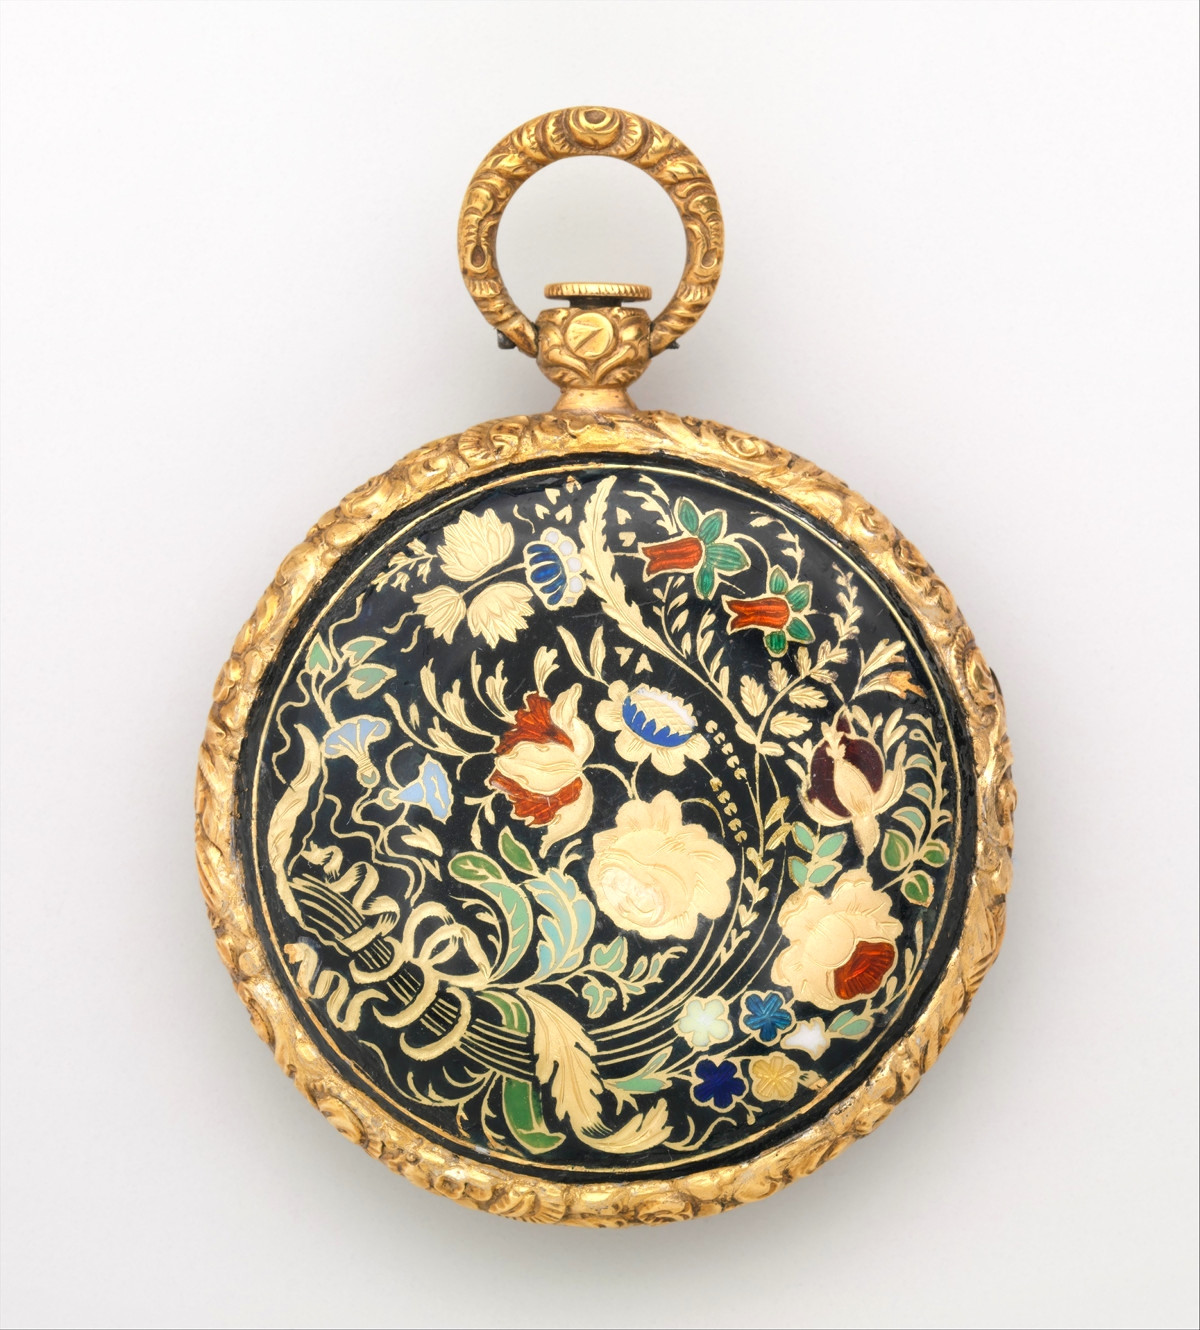 1822. Watch. French, Lyon. Case of gold and enamel, with floral design; jeweled movement, with cylinder escapement. metmuseum